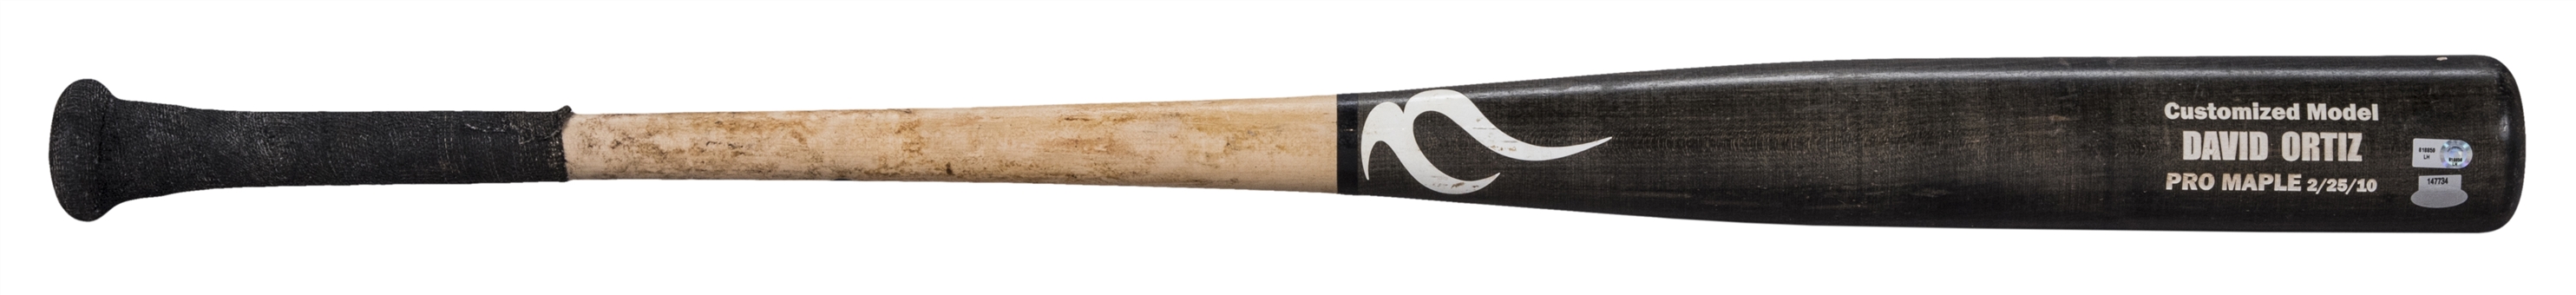 2010 David Ortiz Game Used & Photo Matched Nikona Custom Model Bat From 8/2/10 Game vs. Cleveland (MLB Authenticated, Steiner & Resolution Photomatching)